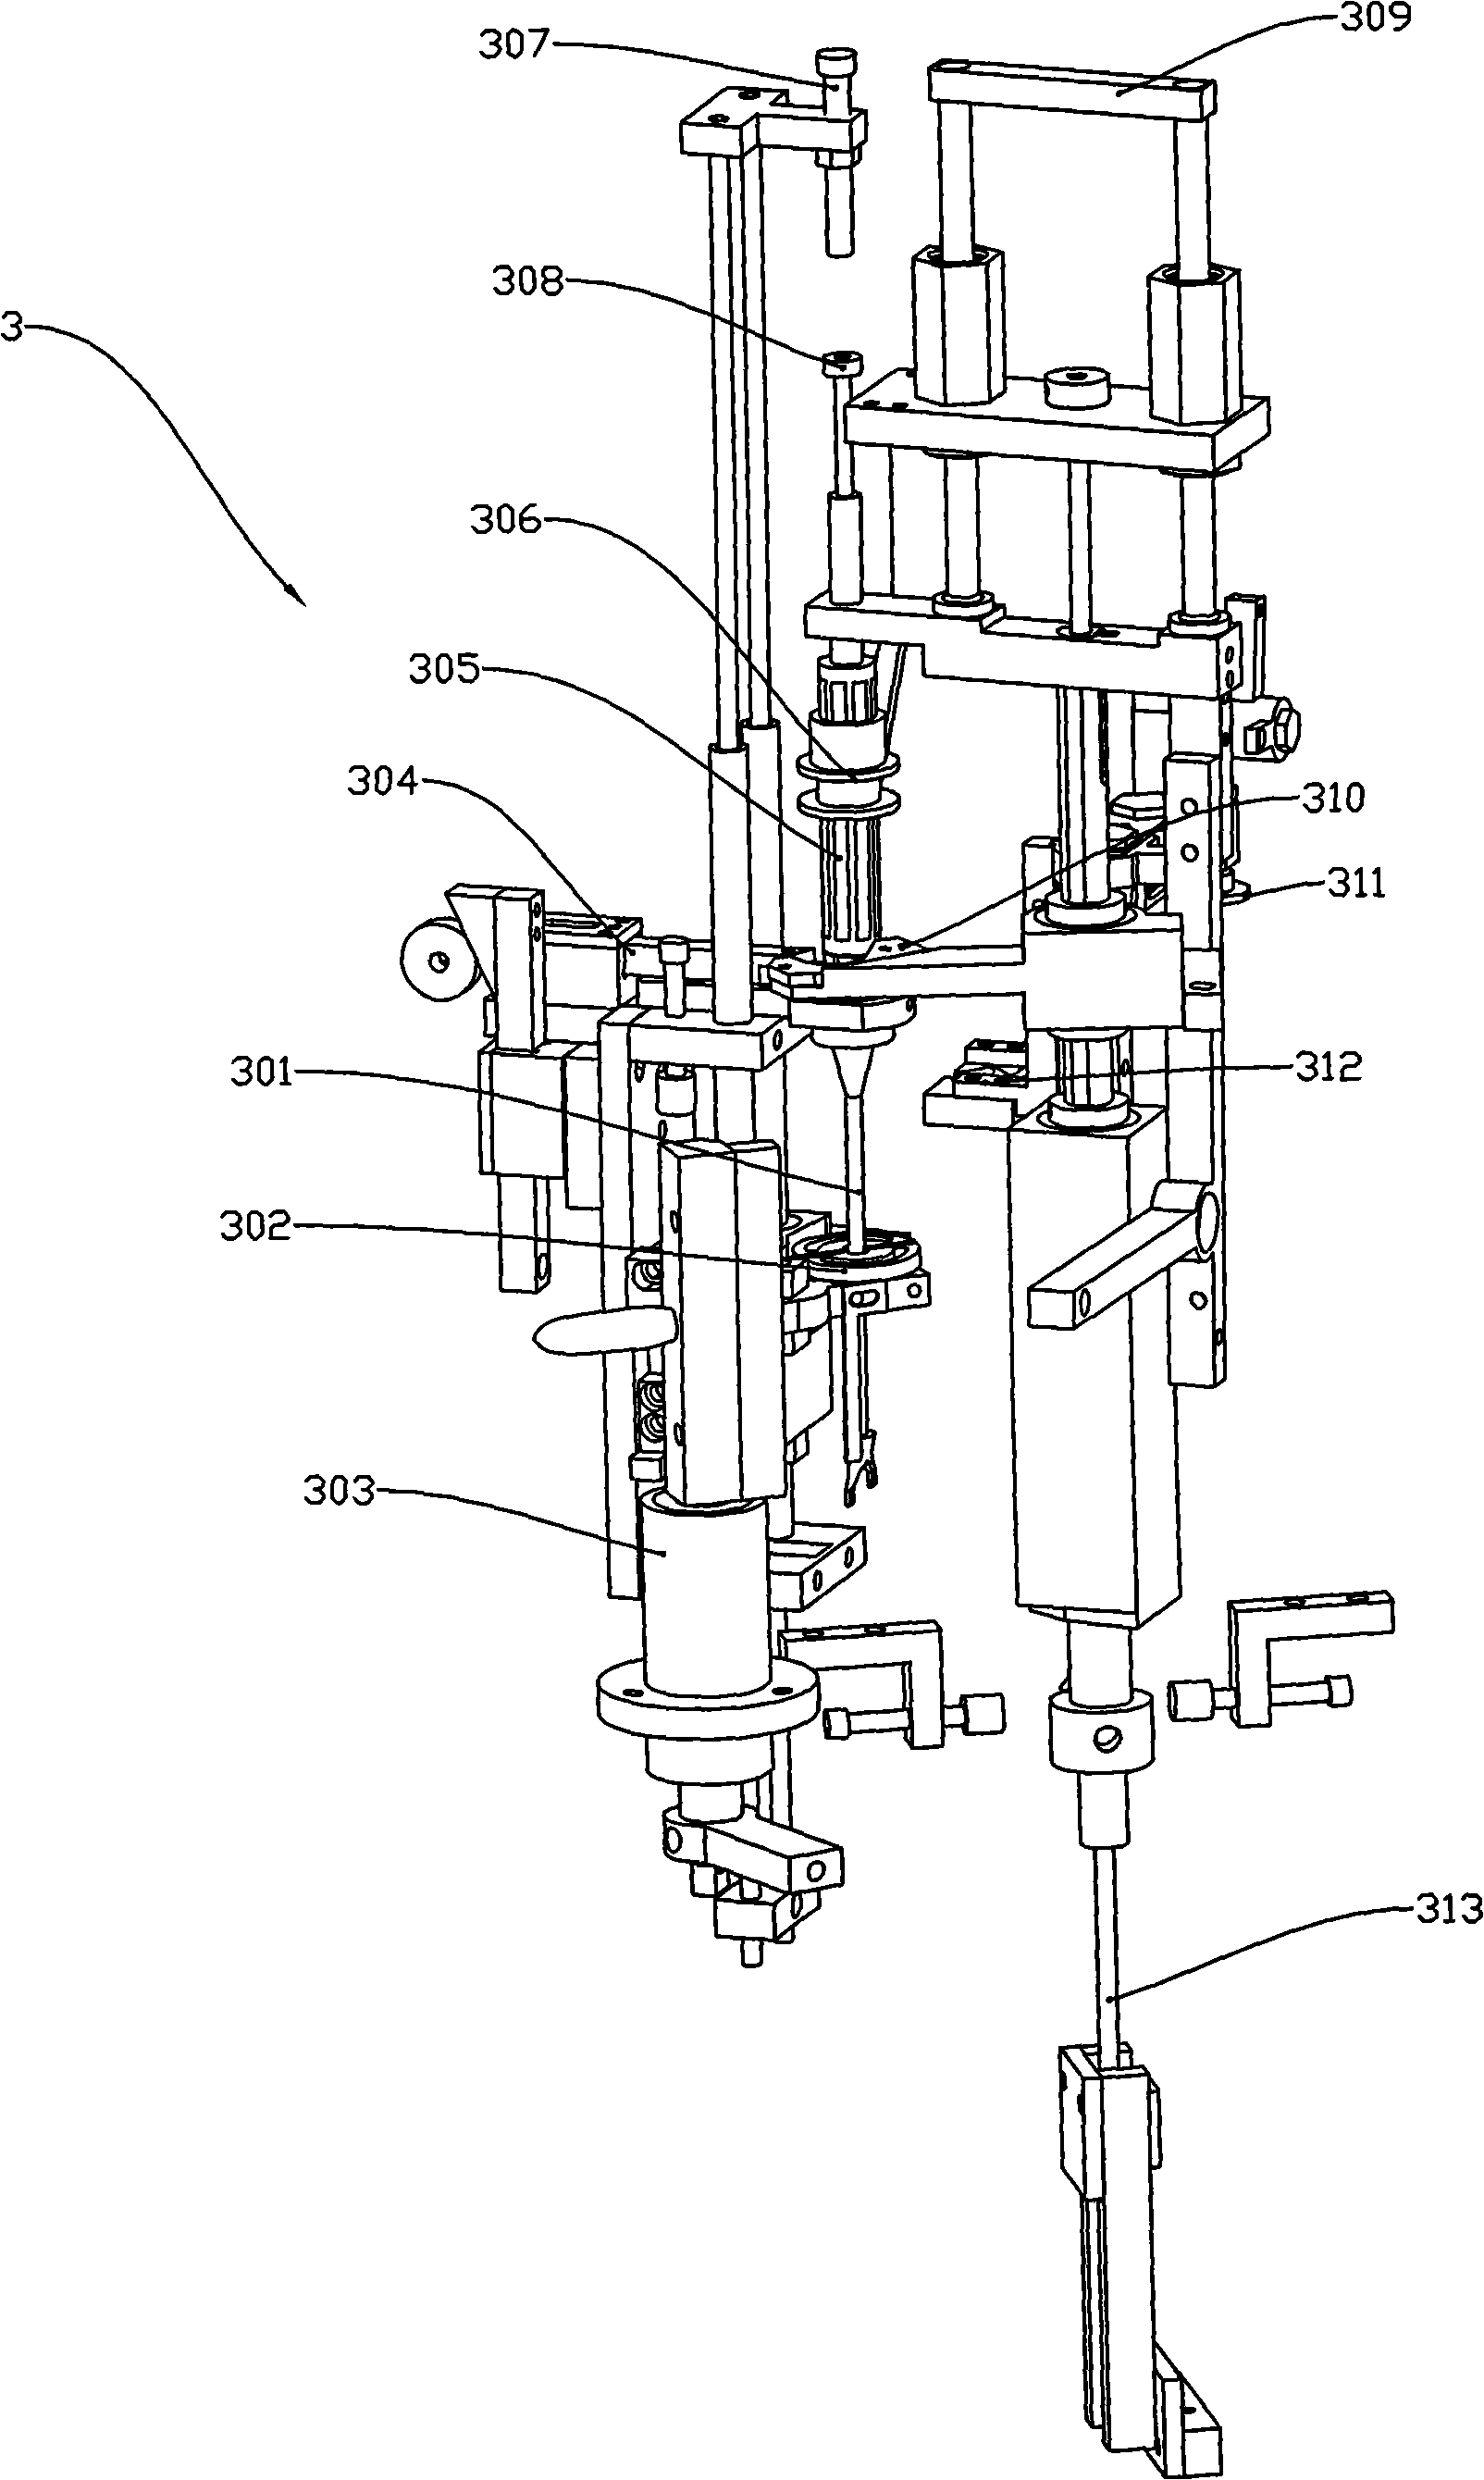 Apparatus for capping sebific duct and adding spacer automatically